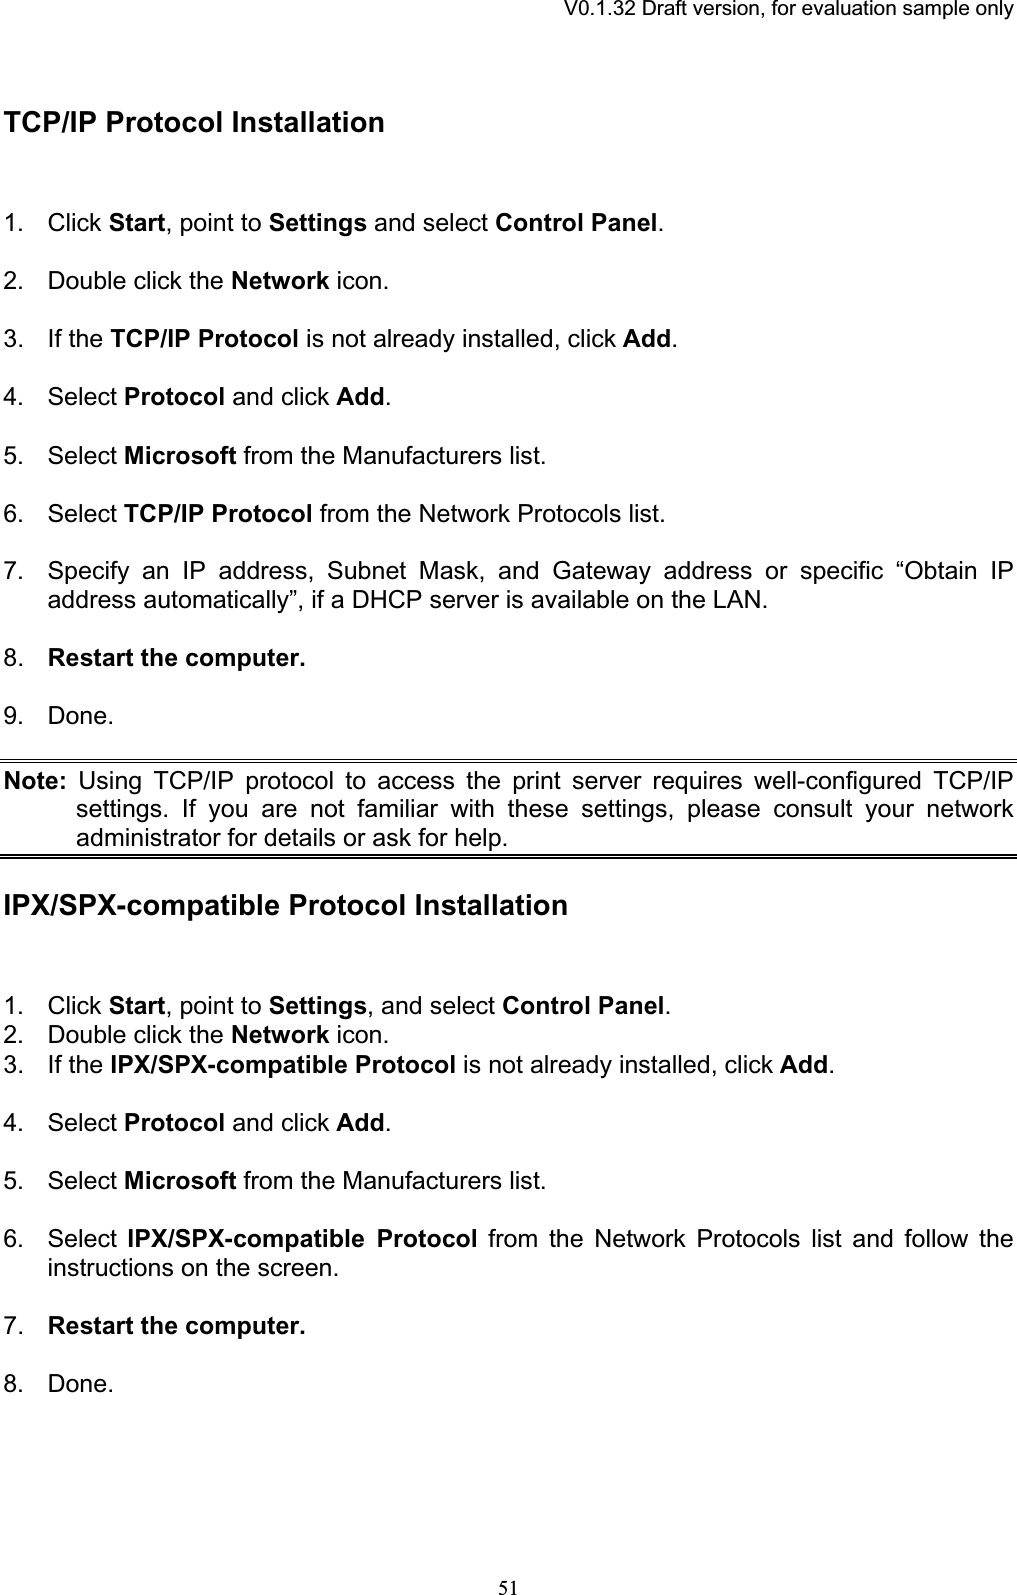 V0.1.32 Draft version, for evaluation sample onlyTCP/IP Protocol Installation 1. Click Start, point to Settings and select Control Panel.2. Double click the Network icon. 3. If the TCP/IP Protocol is not already installed, click Add.4. Select Protocol and click Add.5. Select Microsoft from the Manufacturers list. 6. Select TCP/IP Protocol from the Network Protocols list. 7. Specify an IP address, Subnet Mask, and Gateway address or specific “Obtain IP address automatically”, if a DHCP server is available on the LAN. 8. Restart the computer.9. Done. Note: Using TCP/IP protocol to access the print server requires well-configured TCP/IP settings. If you are not familiar with these settings, please consult your network administrator for details or ask for help. IPX/SPX-compatible Protocol Installation 1. Click Start, point to Settings, and select Control Panel.2. Double click the Network icon. 3. If the IPX/SPX-compatible Protocol is not already installed, click Add.4. Select Protocol and click Add.5. Select Microsoft from the Manufacturers list. 6. Select IPX/SPX-compatible Protocol from the Network Protocols list and follow the instructions on the screen. 7. Restart the computer.8. Done. 51